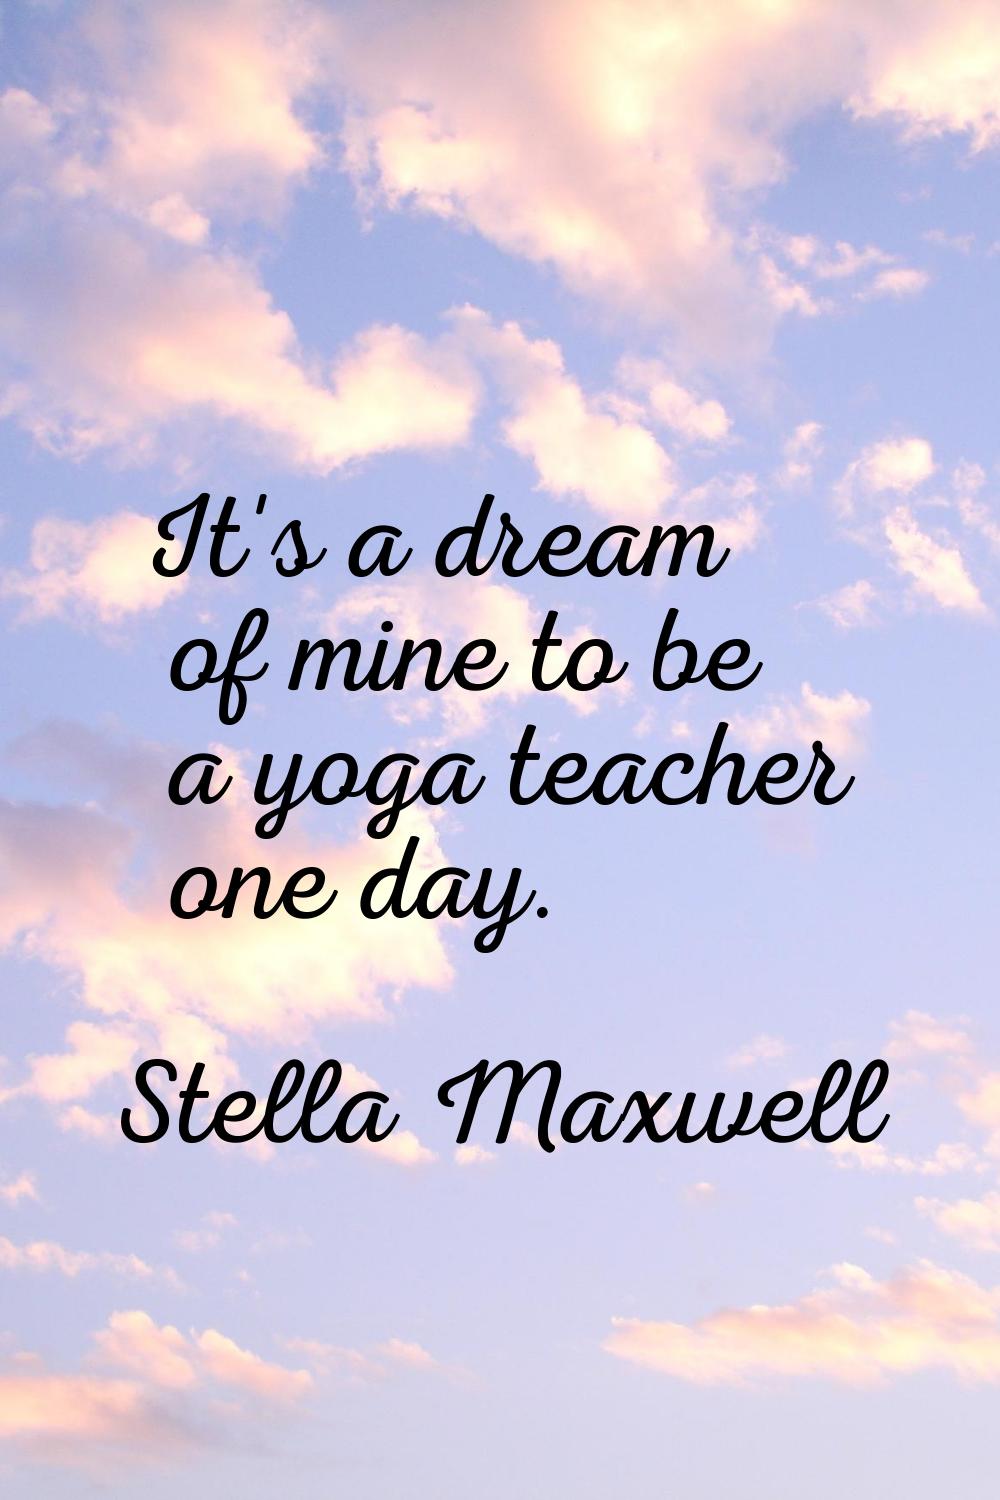 It's a dream of mine to be a yoga teacher one day.